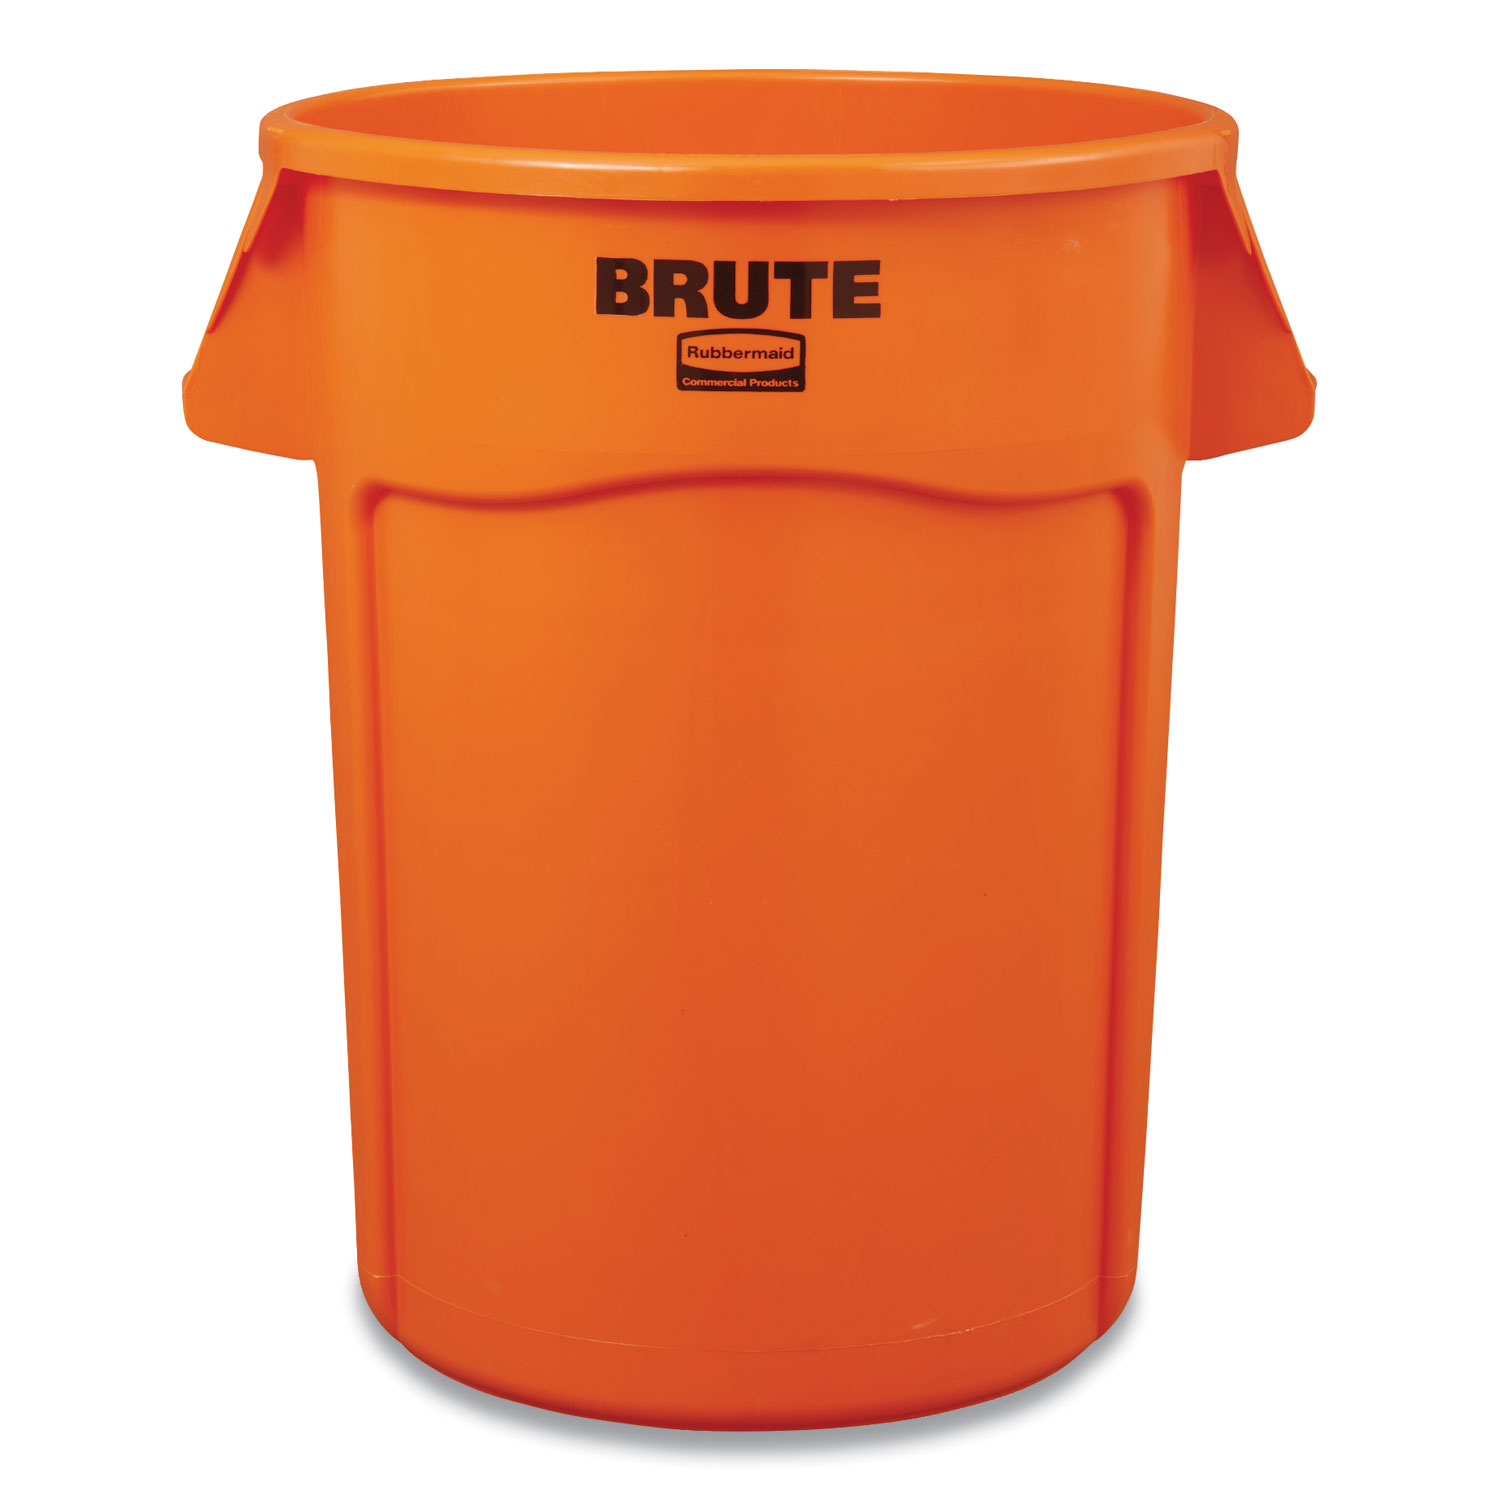  Rubbermaid Commercial 2119307 Brute Round Containers, 44 gal, Orange (RCP2119307) 